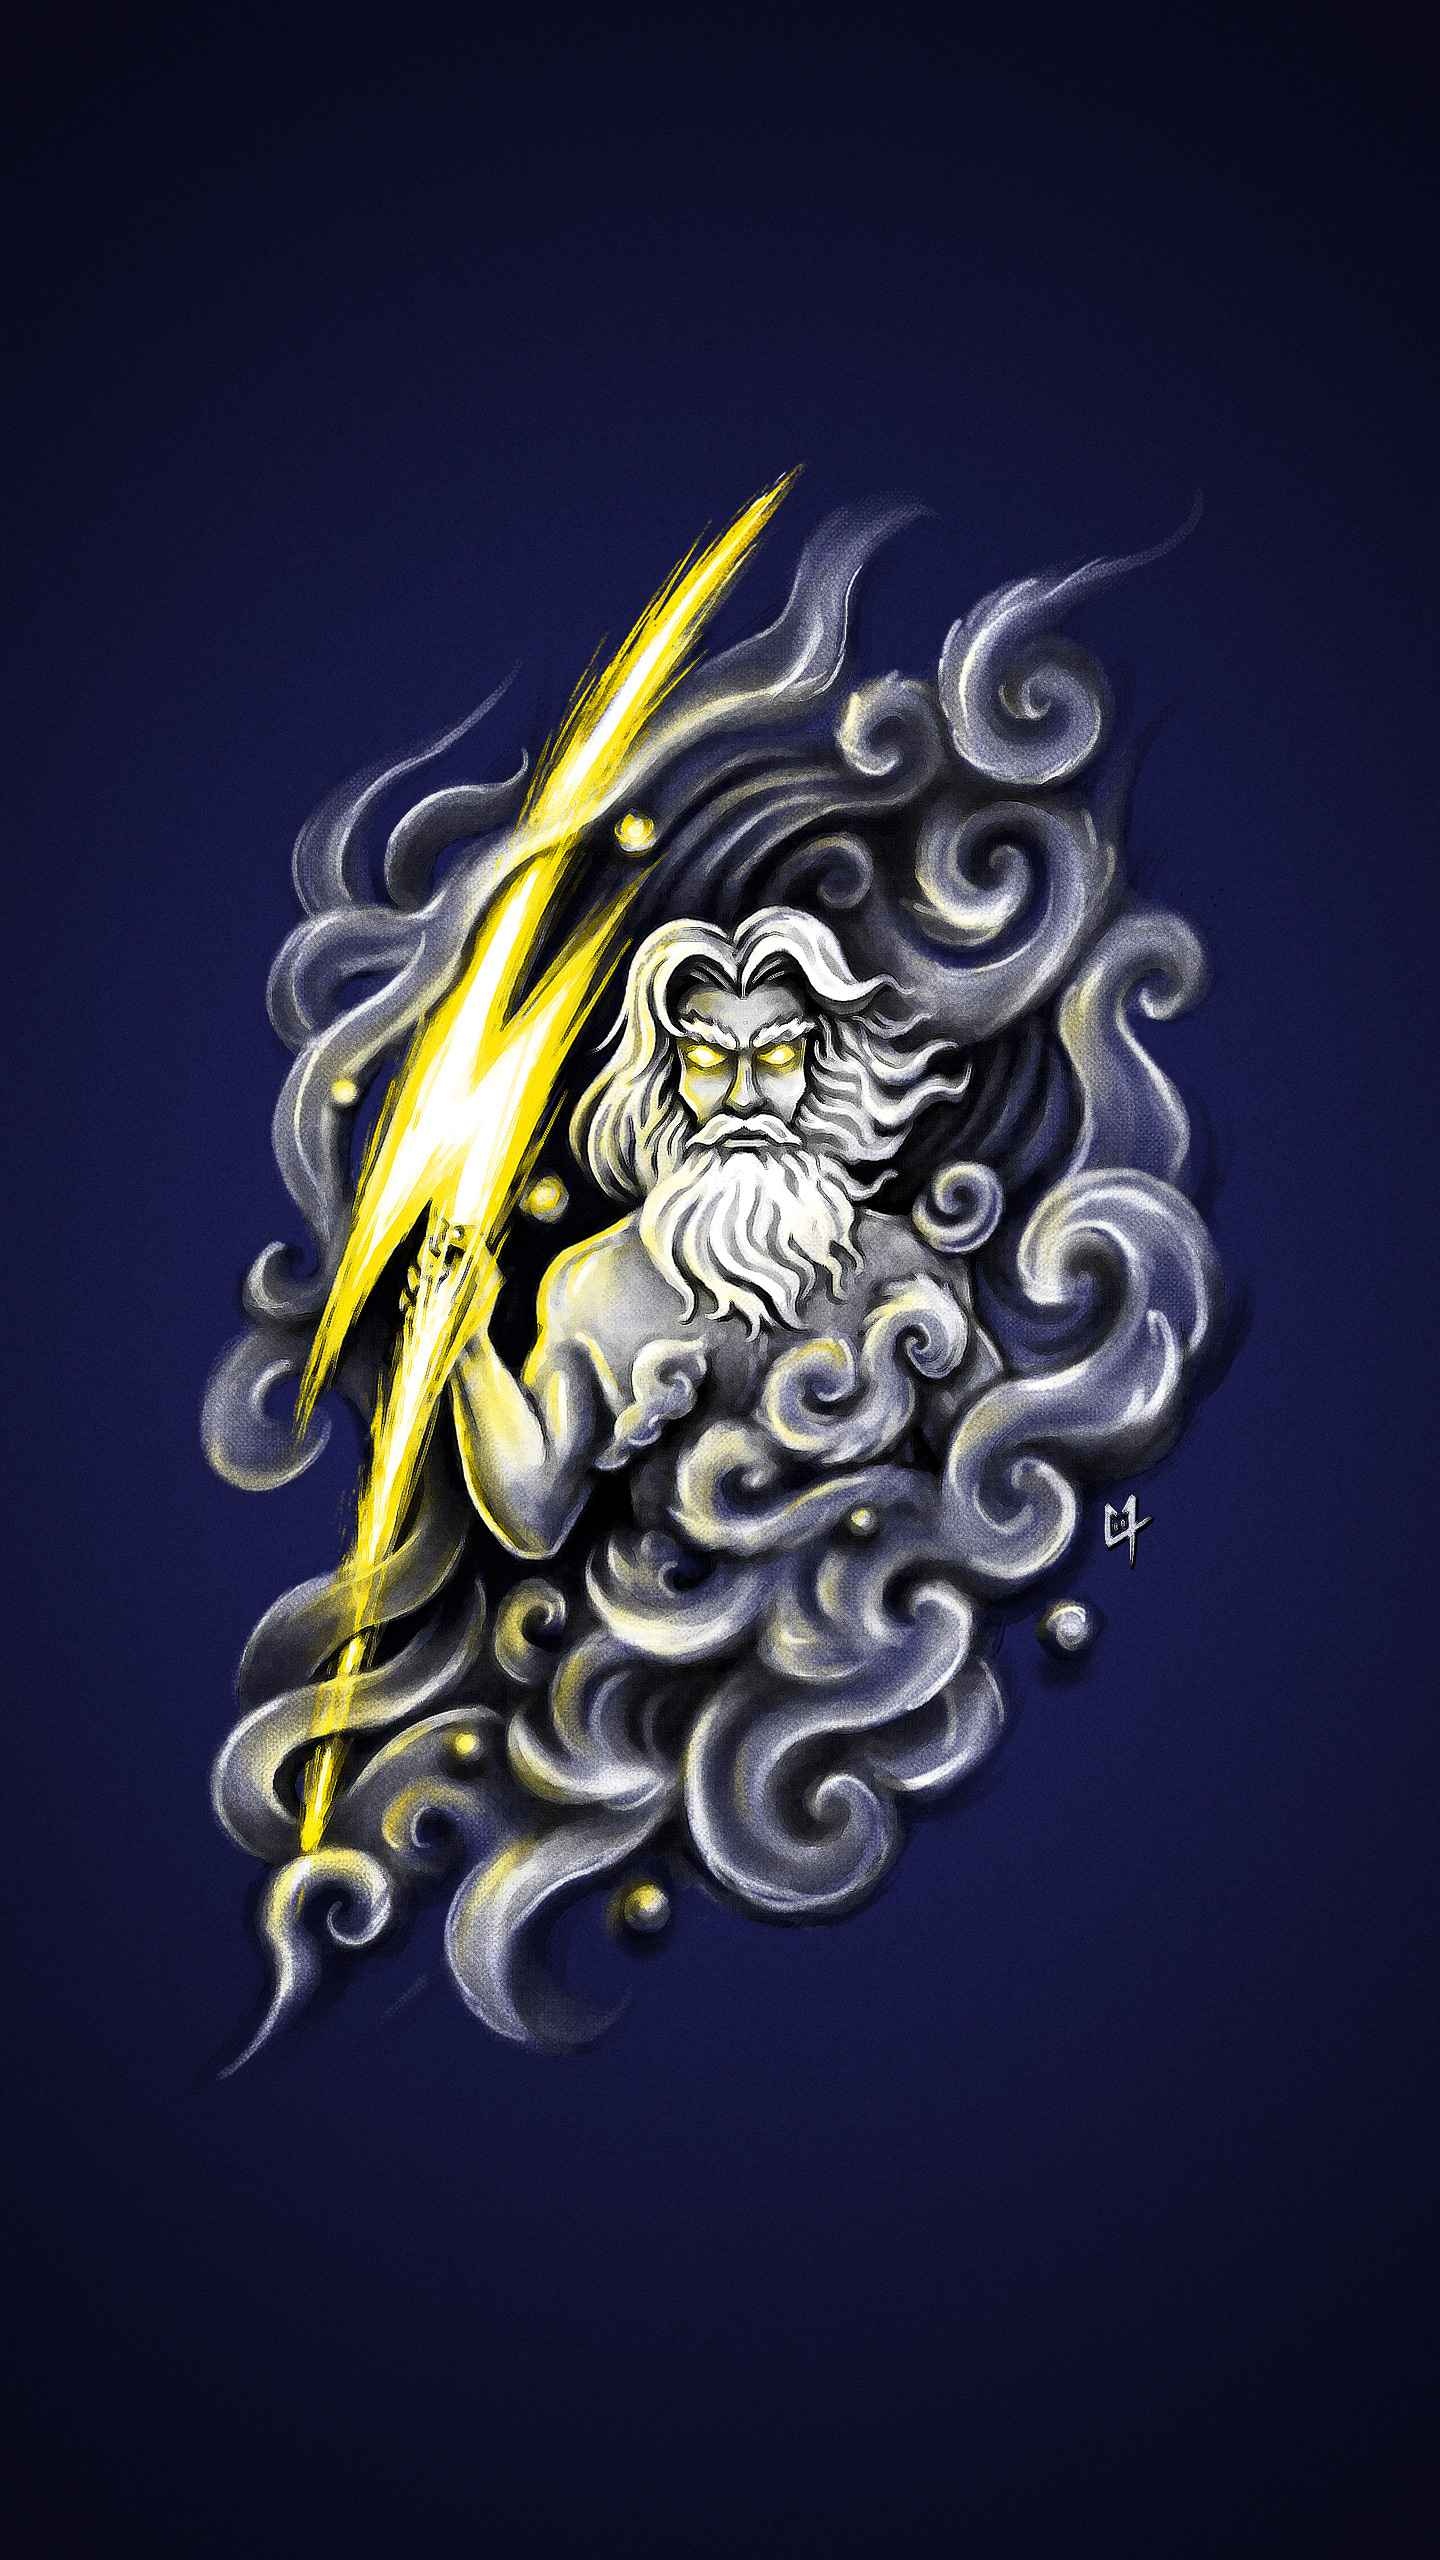 Zeus: The patron of hospitality and guests, The avenger of wrongs done to strangers. 1440x2560 HD Wallpaper.